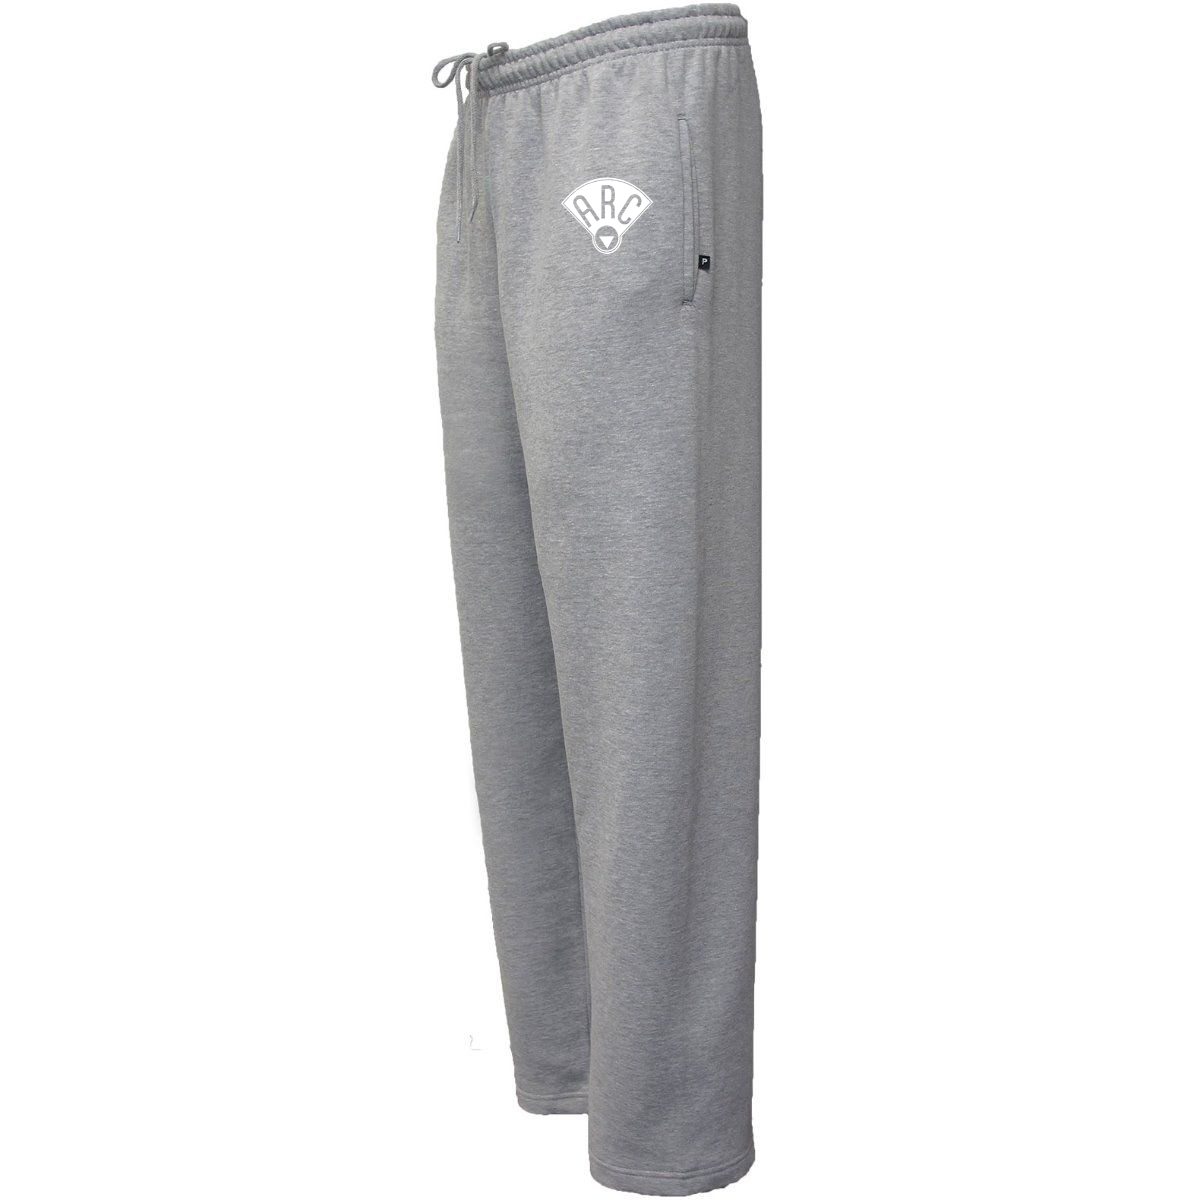 Arc Lacrosse Club Sweatpants *Highly Suggested for Team Travel & Games*